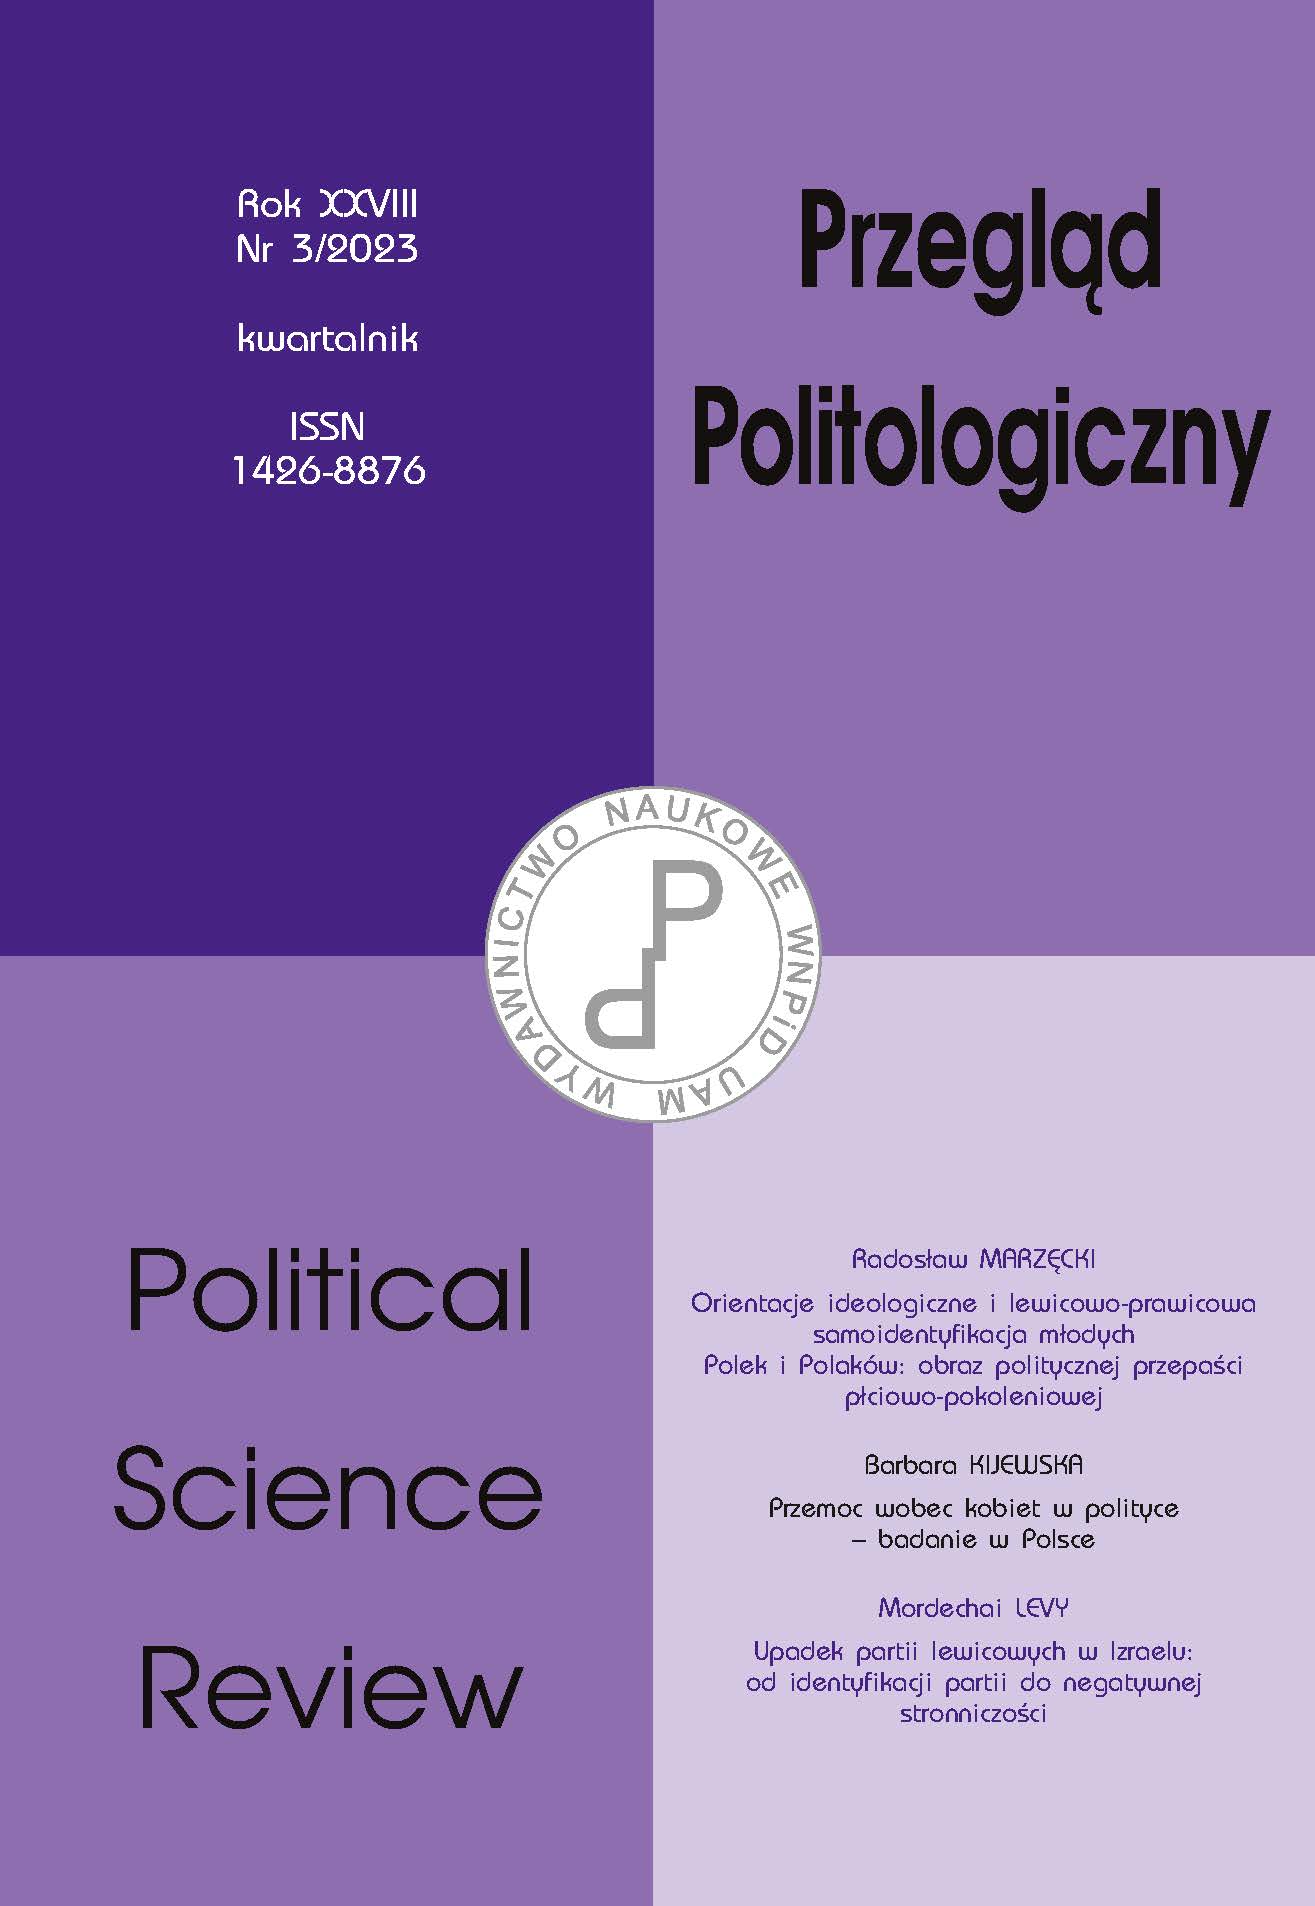 PO-PiS agreement in the 2002 local government elections on the example of the podkarpackie voivodship Cover Image